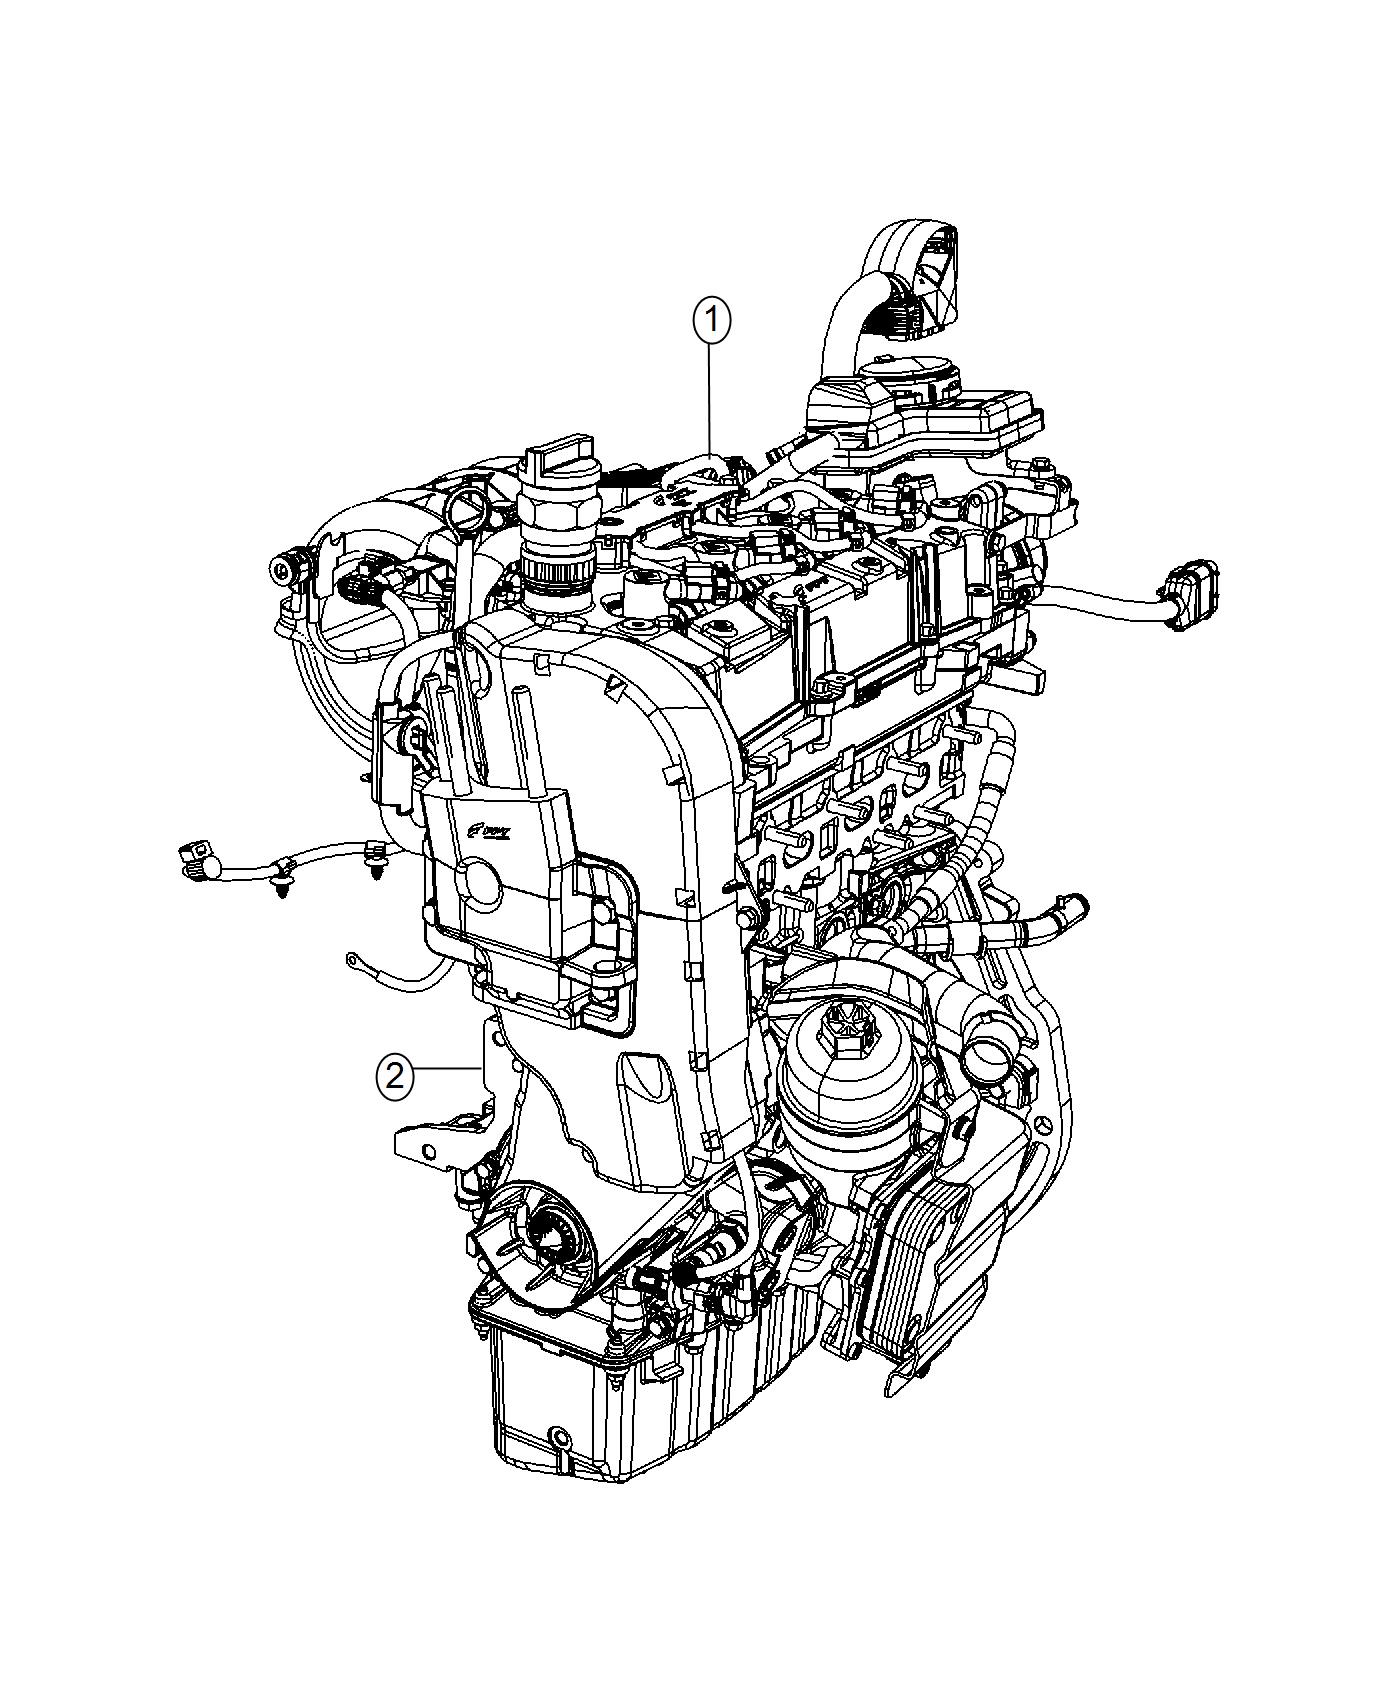 Diagram Engine Assembly And Service Long Block 1.4L Turbocharged [1.4L I4 MultiAir Turbo Engine]. for your Fiat